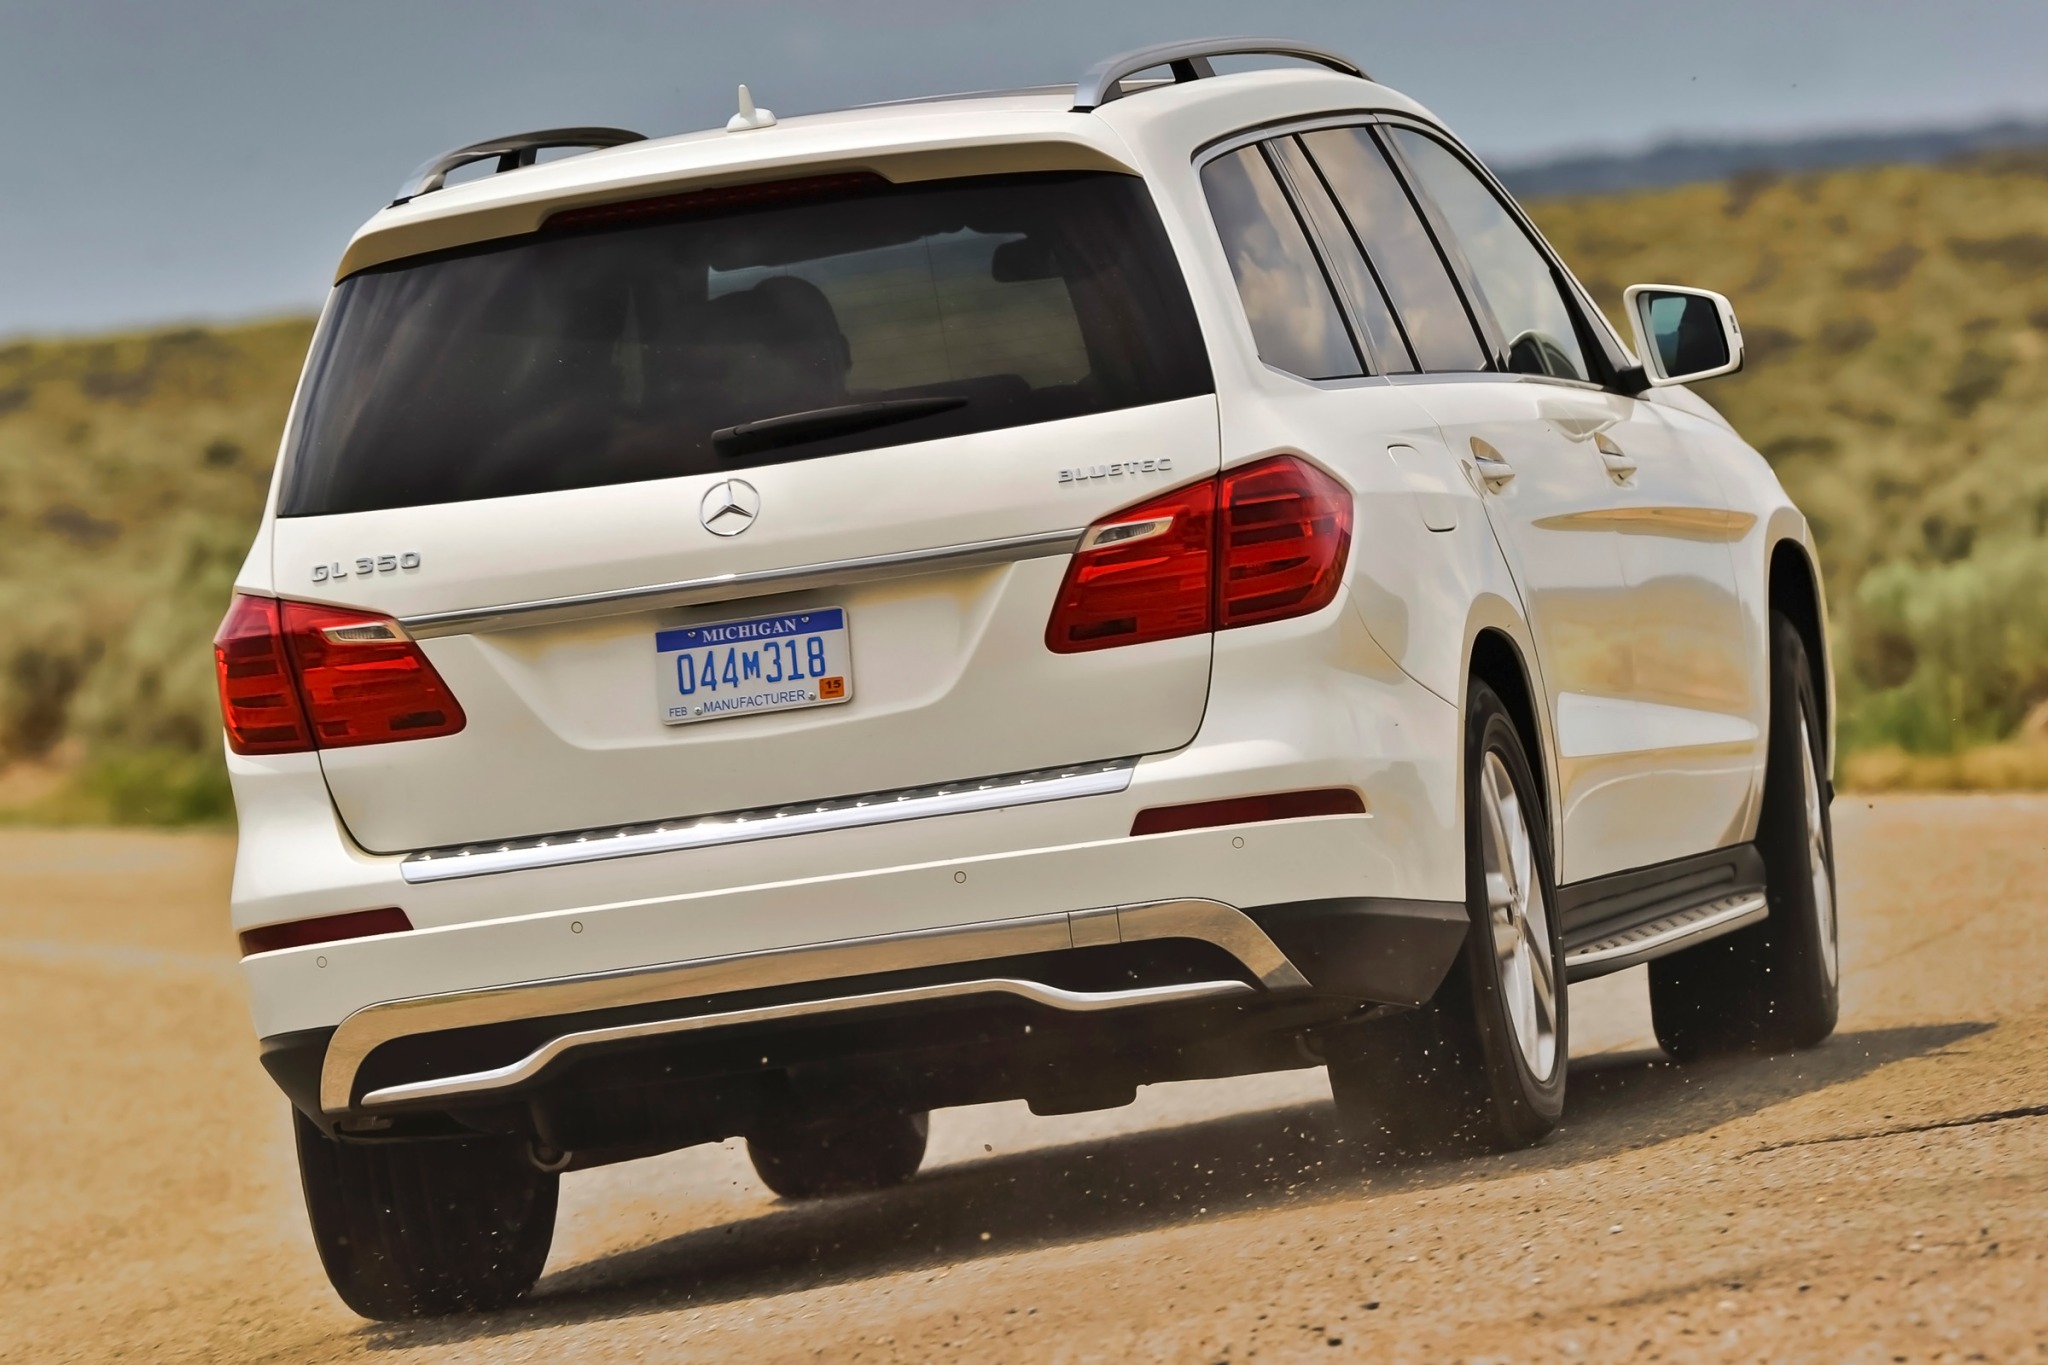 2015 Mercedes-Benz GL-Class VIN Number Search - AutoDetective